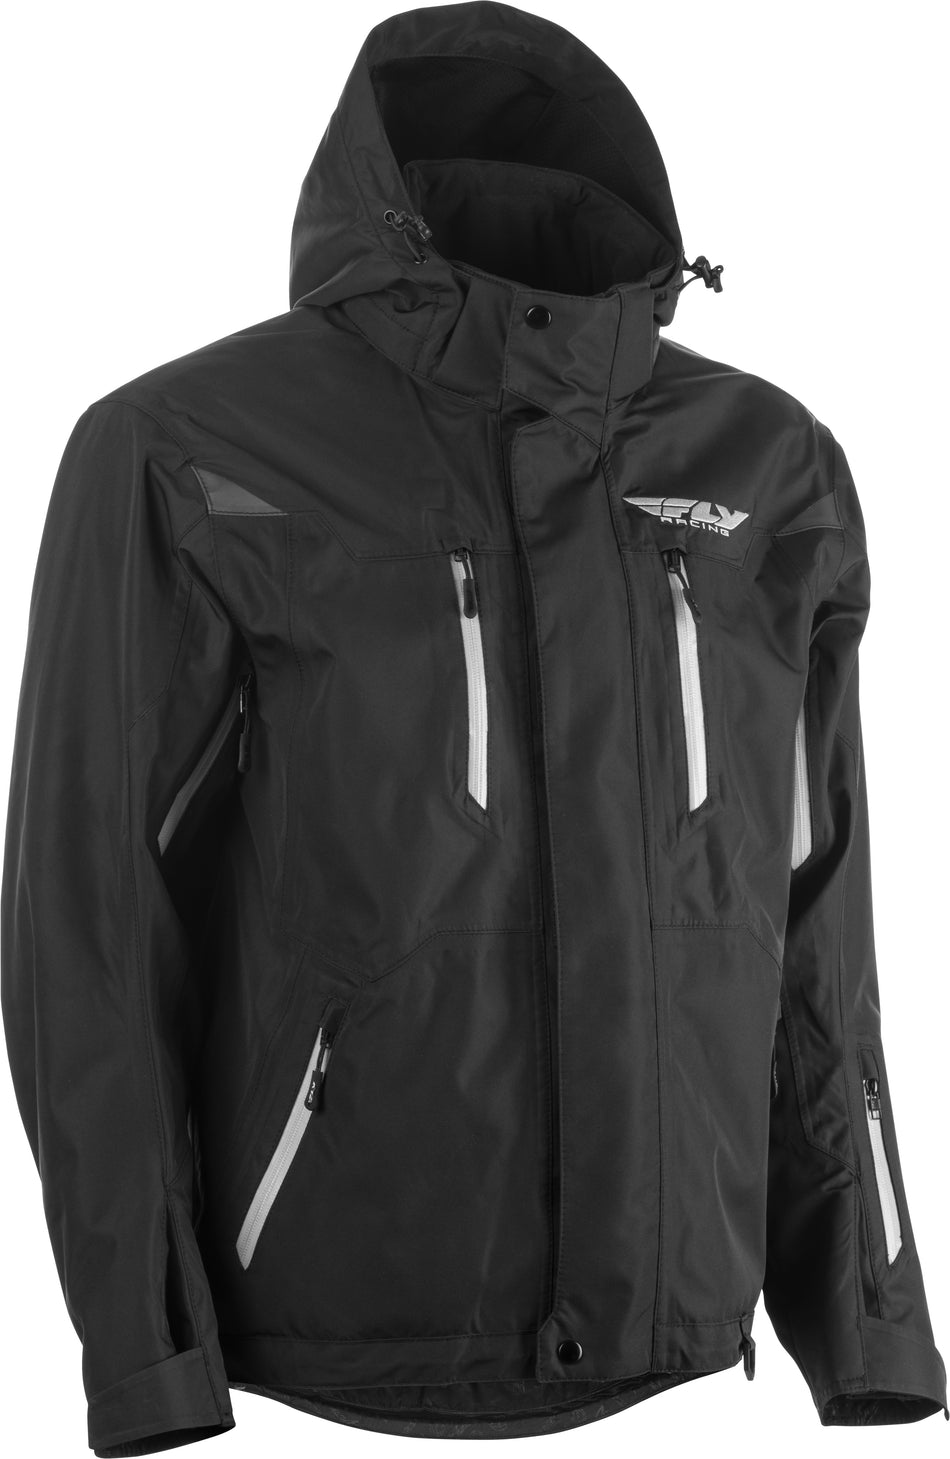 FLY RACING Fly Incline Jacket Black Xl 470-4100X